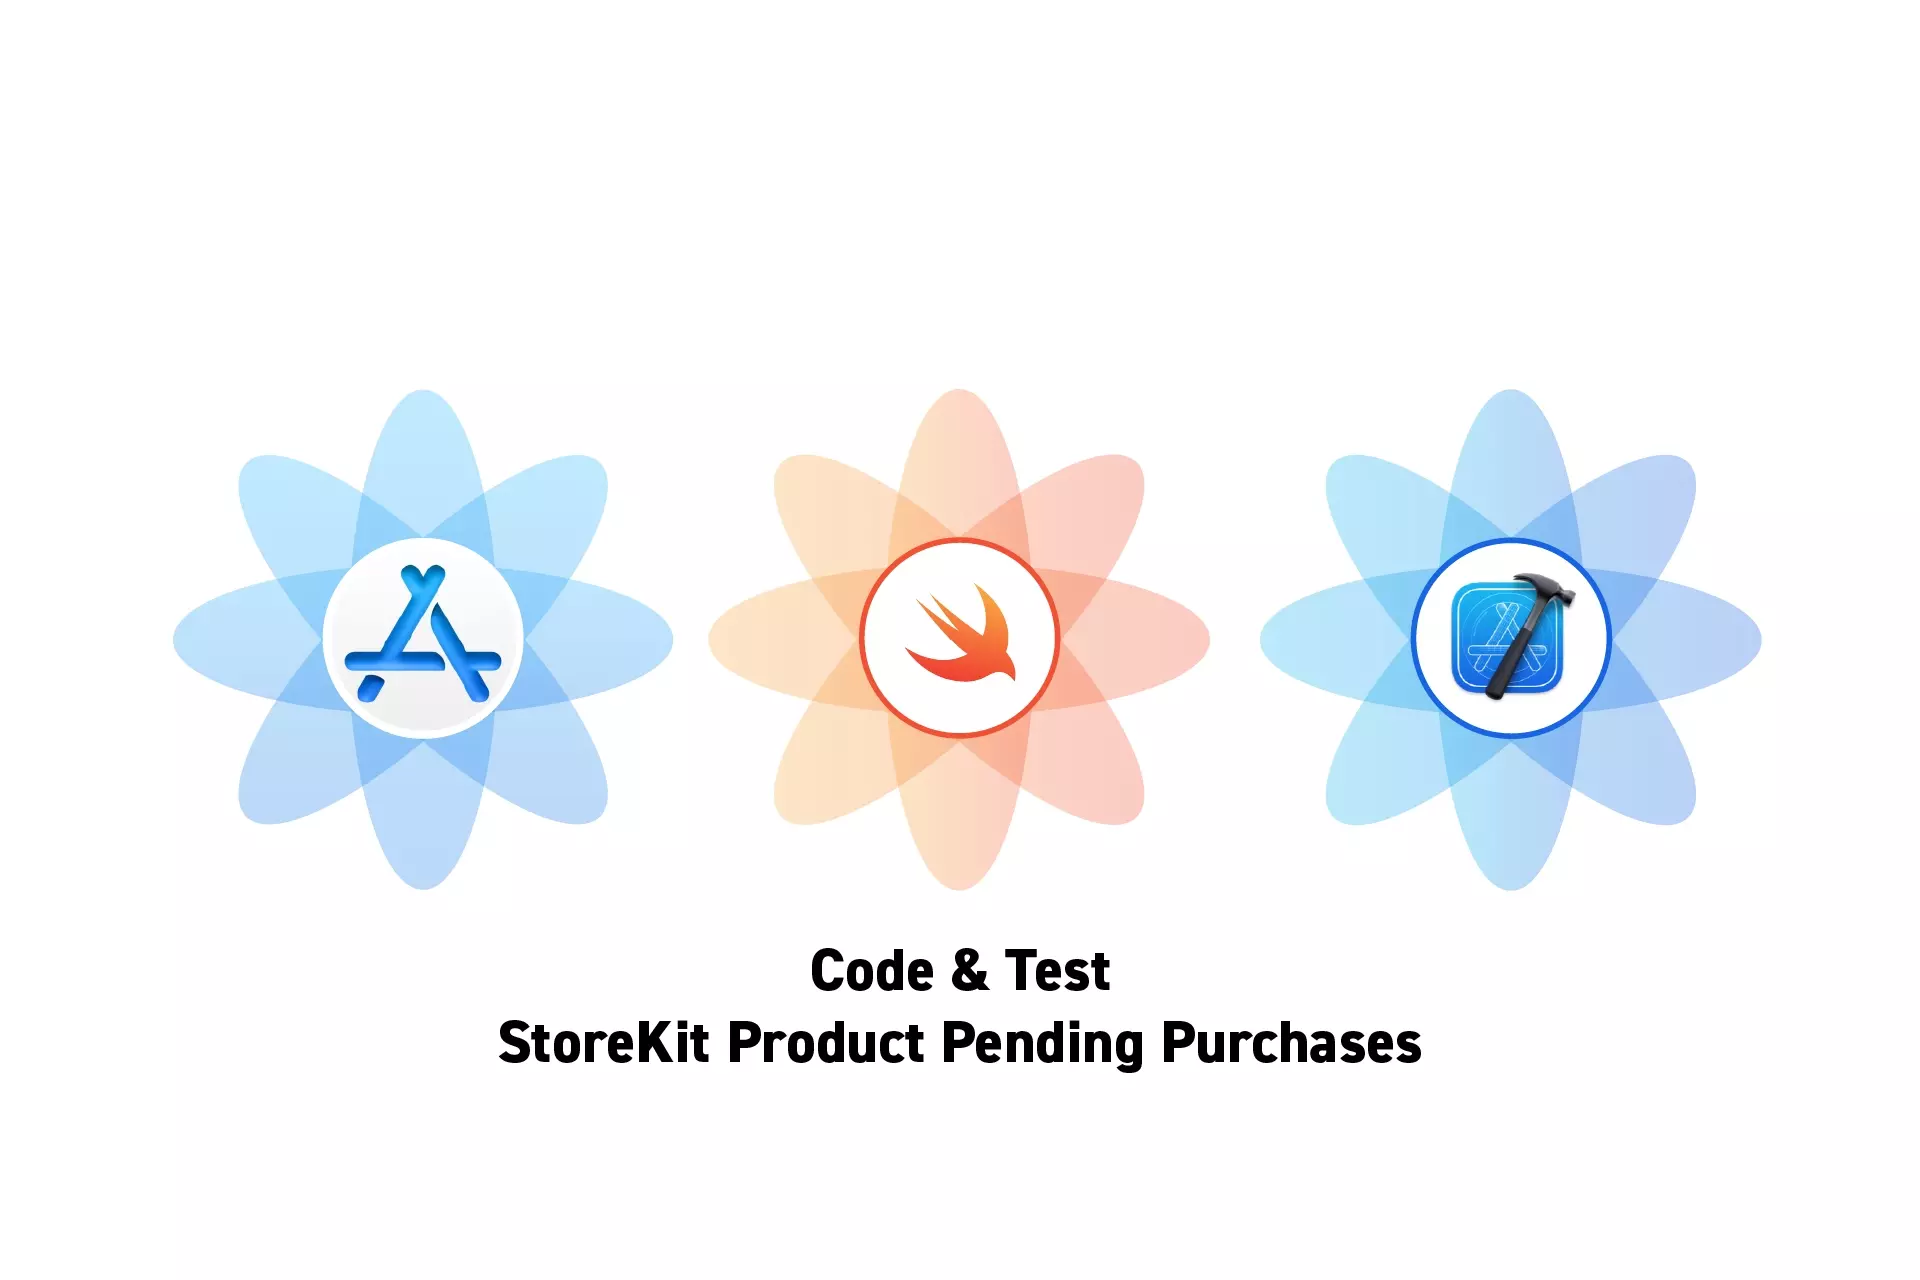 Three flowers that represent StoreKit, Swift and XCode side by side. Beneath them sits the text “Code & Test StoreKit Product Pending Purchases.”